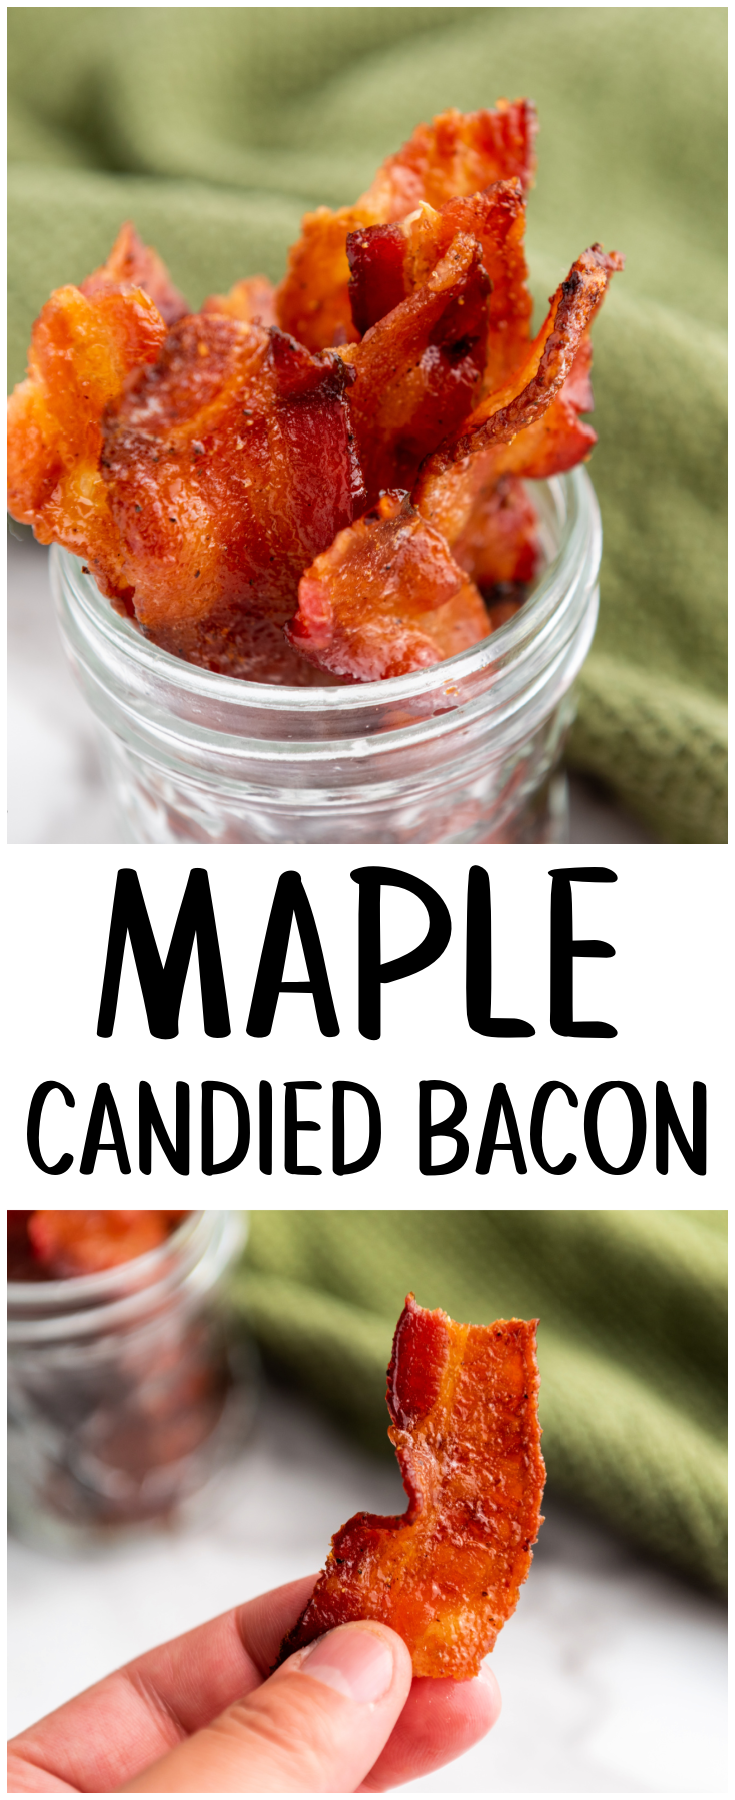 Sweet and savory, this Candied Maple Brown Sugar Bacon is the perfect treat! Follow this recipe to make this simple treat that everyone will love!